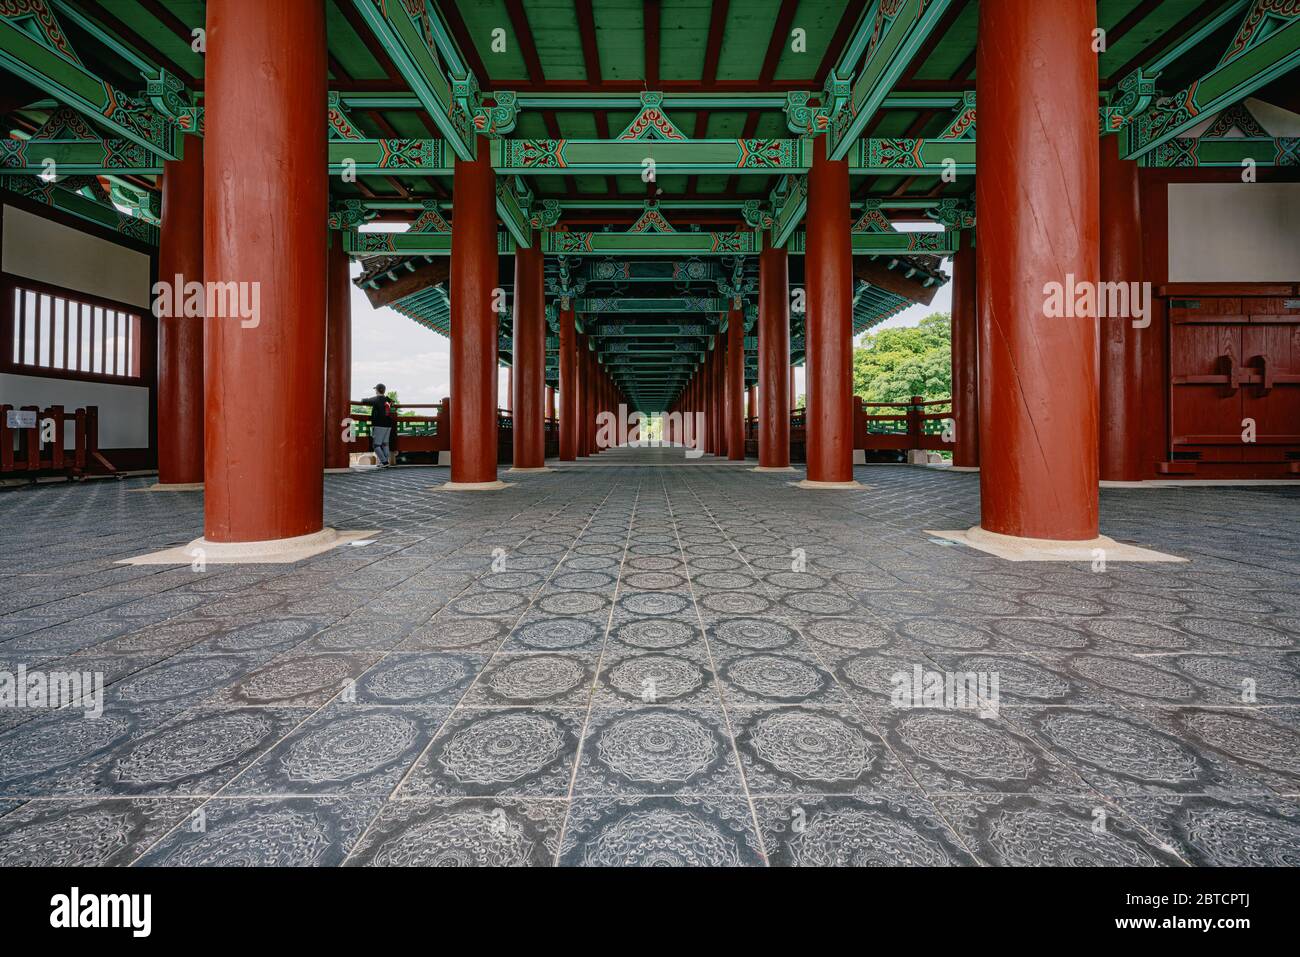 Gyeongju, South Korea - 22 May 2020: The Woljeonggyo Bridge was destroyed at one point, but has been well restored and is a worthwhile sight to visit. Stock Photo